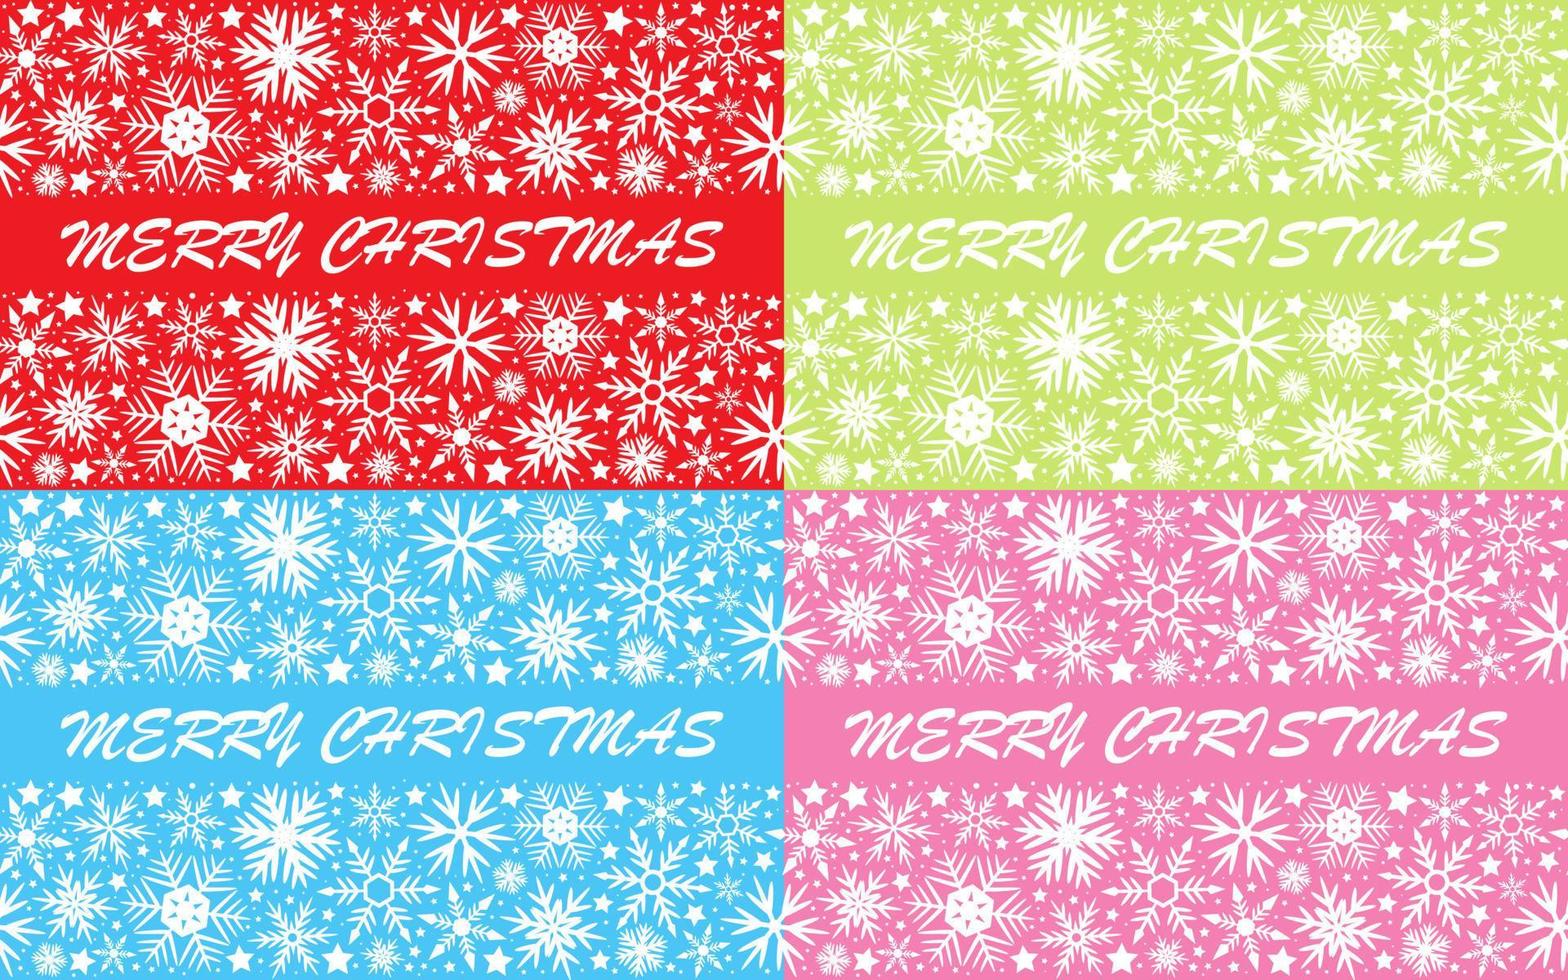 Snowflakes seamless pattern set for decoration of Christmas decor and design. Vector